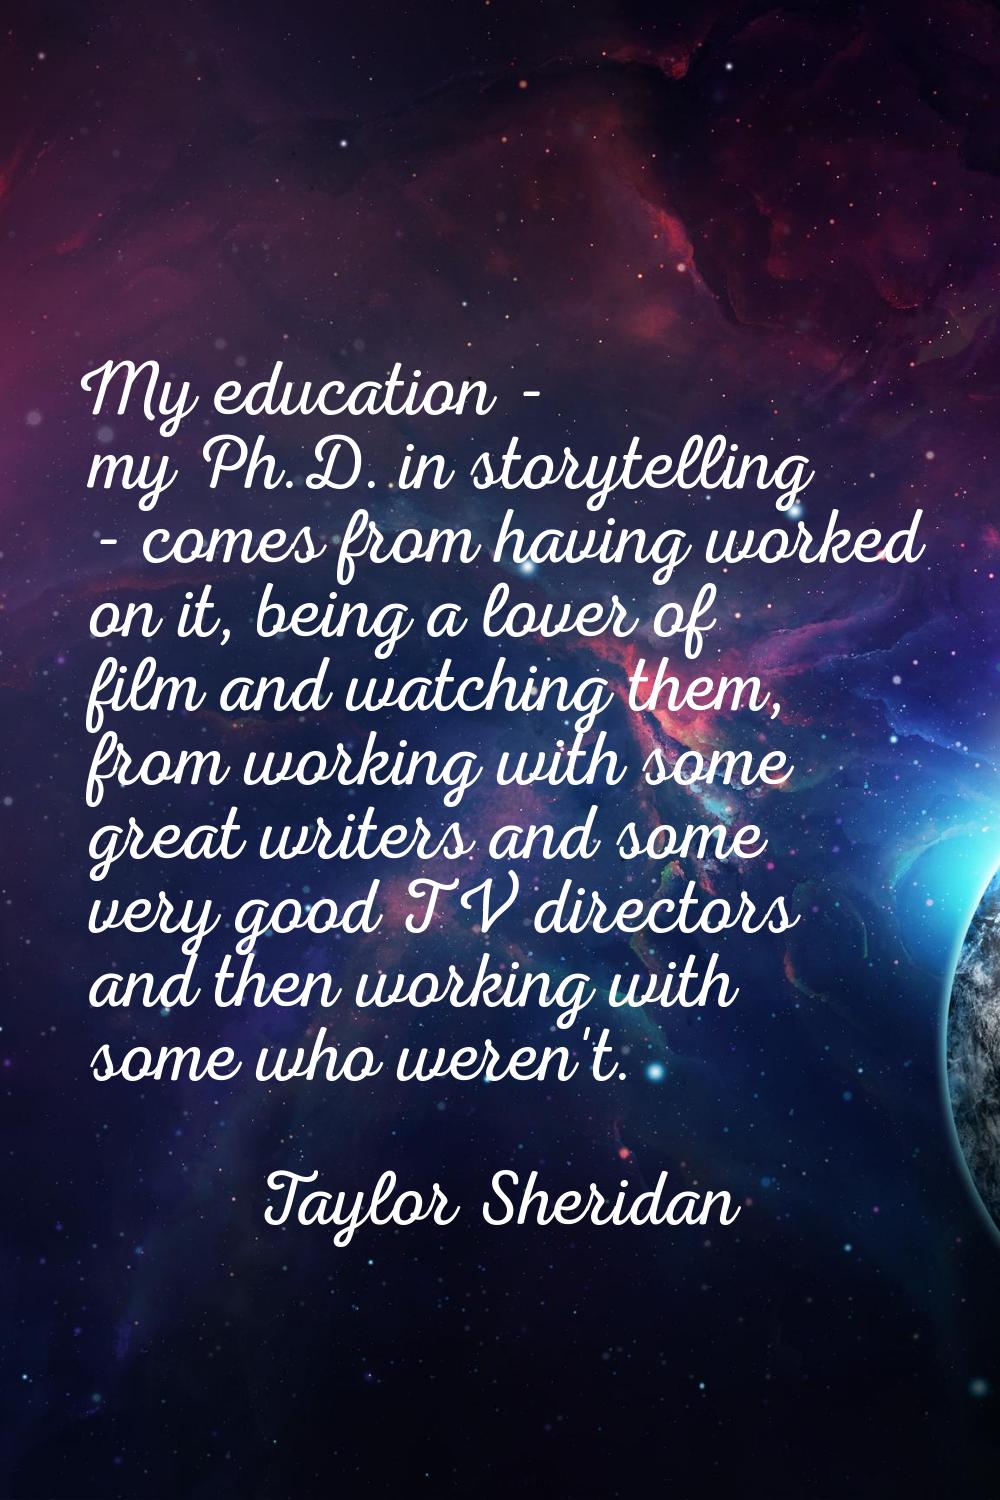 My education - my Ph.D. in storytelling - comes from having worked on it, being a lover of film and